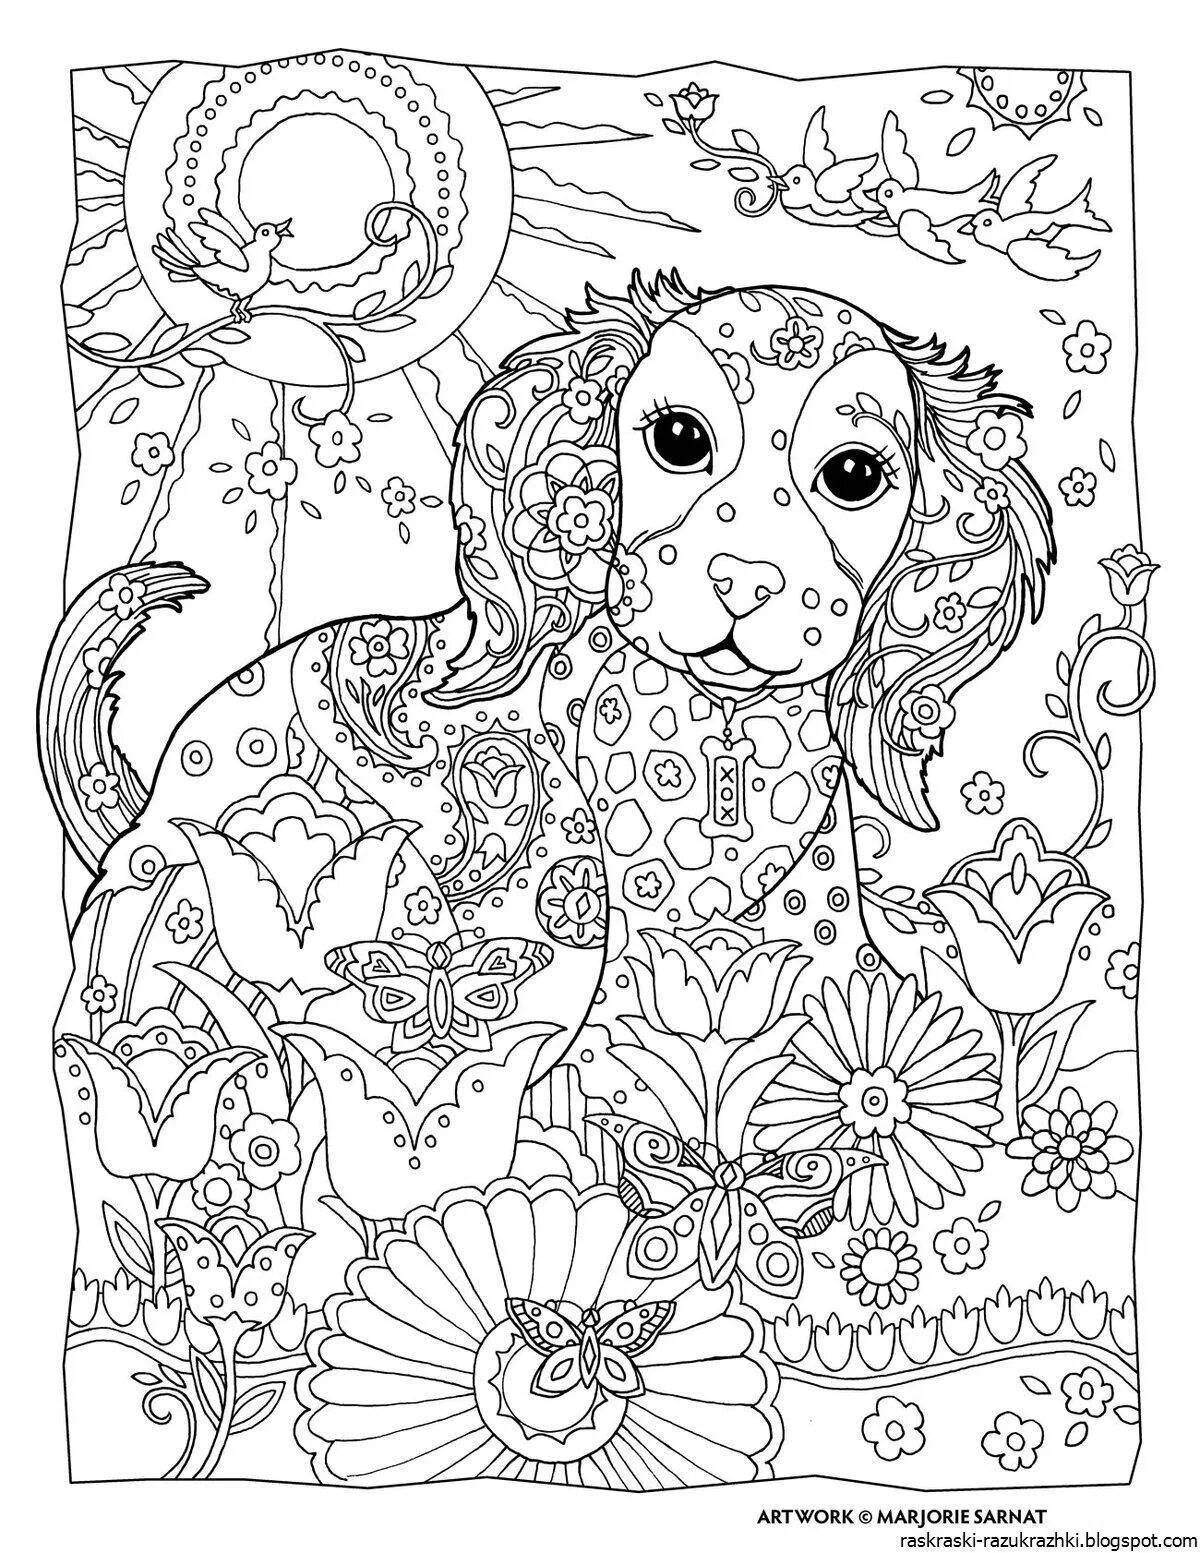 Wonderful coloring for girls 9-10 years old - very beautiful animals